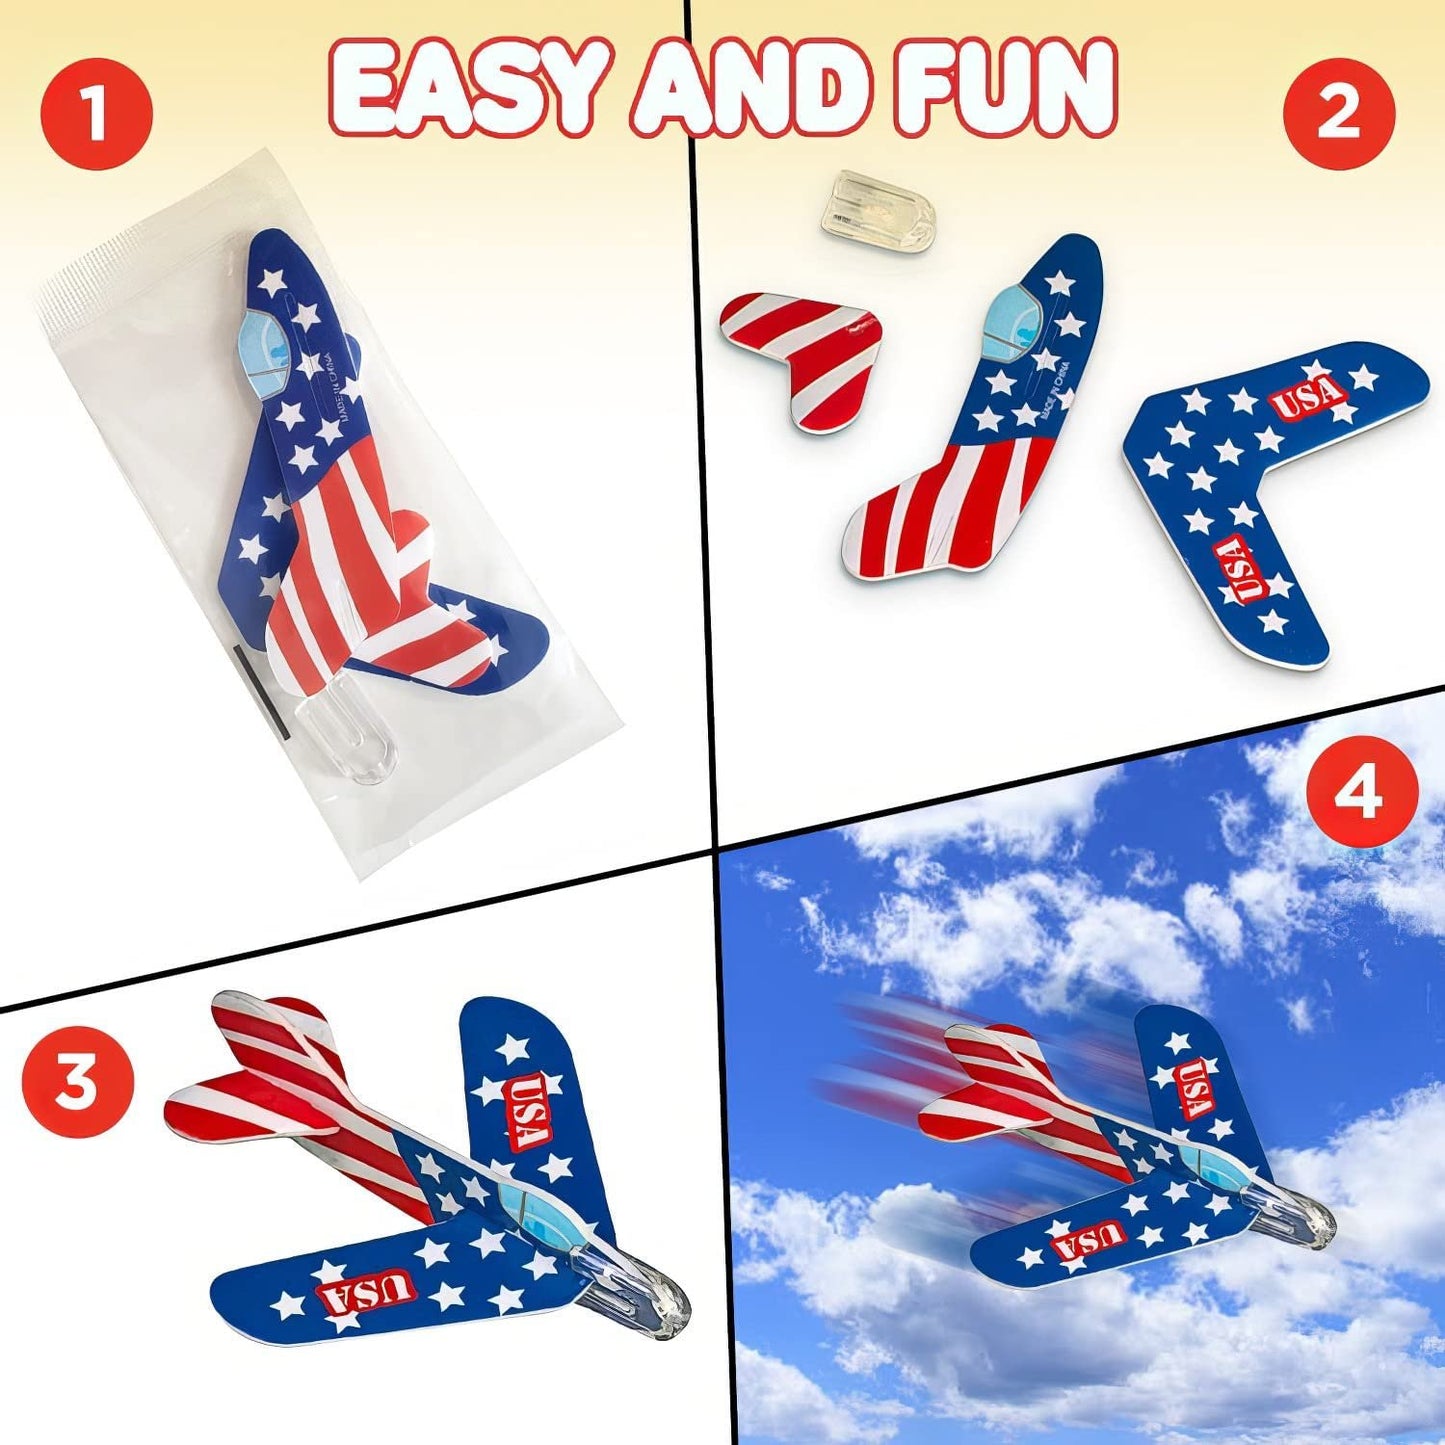 ArtCreativity Foam Gliders for Kids - Bulk Set of 72 - Lightweight Planes with Various Designs - Individually Packed Flying Airplanes - Fun Birthday Party Favors, Goodie Bag Fillers, Boys and Girls